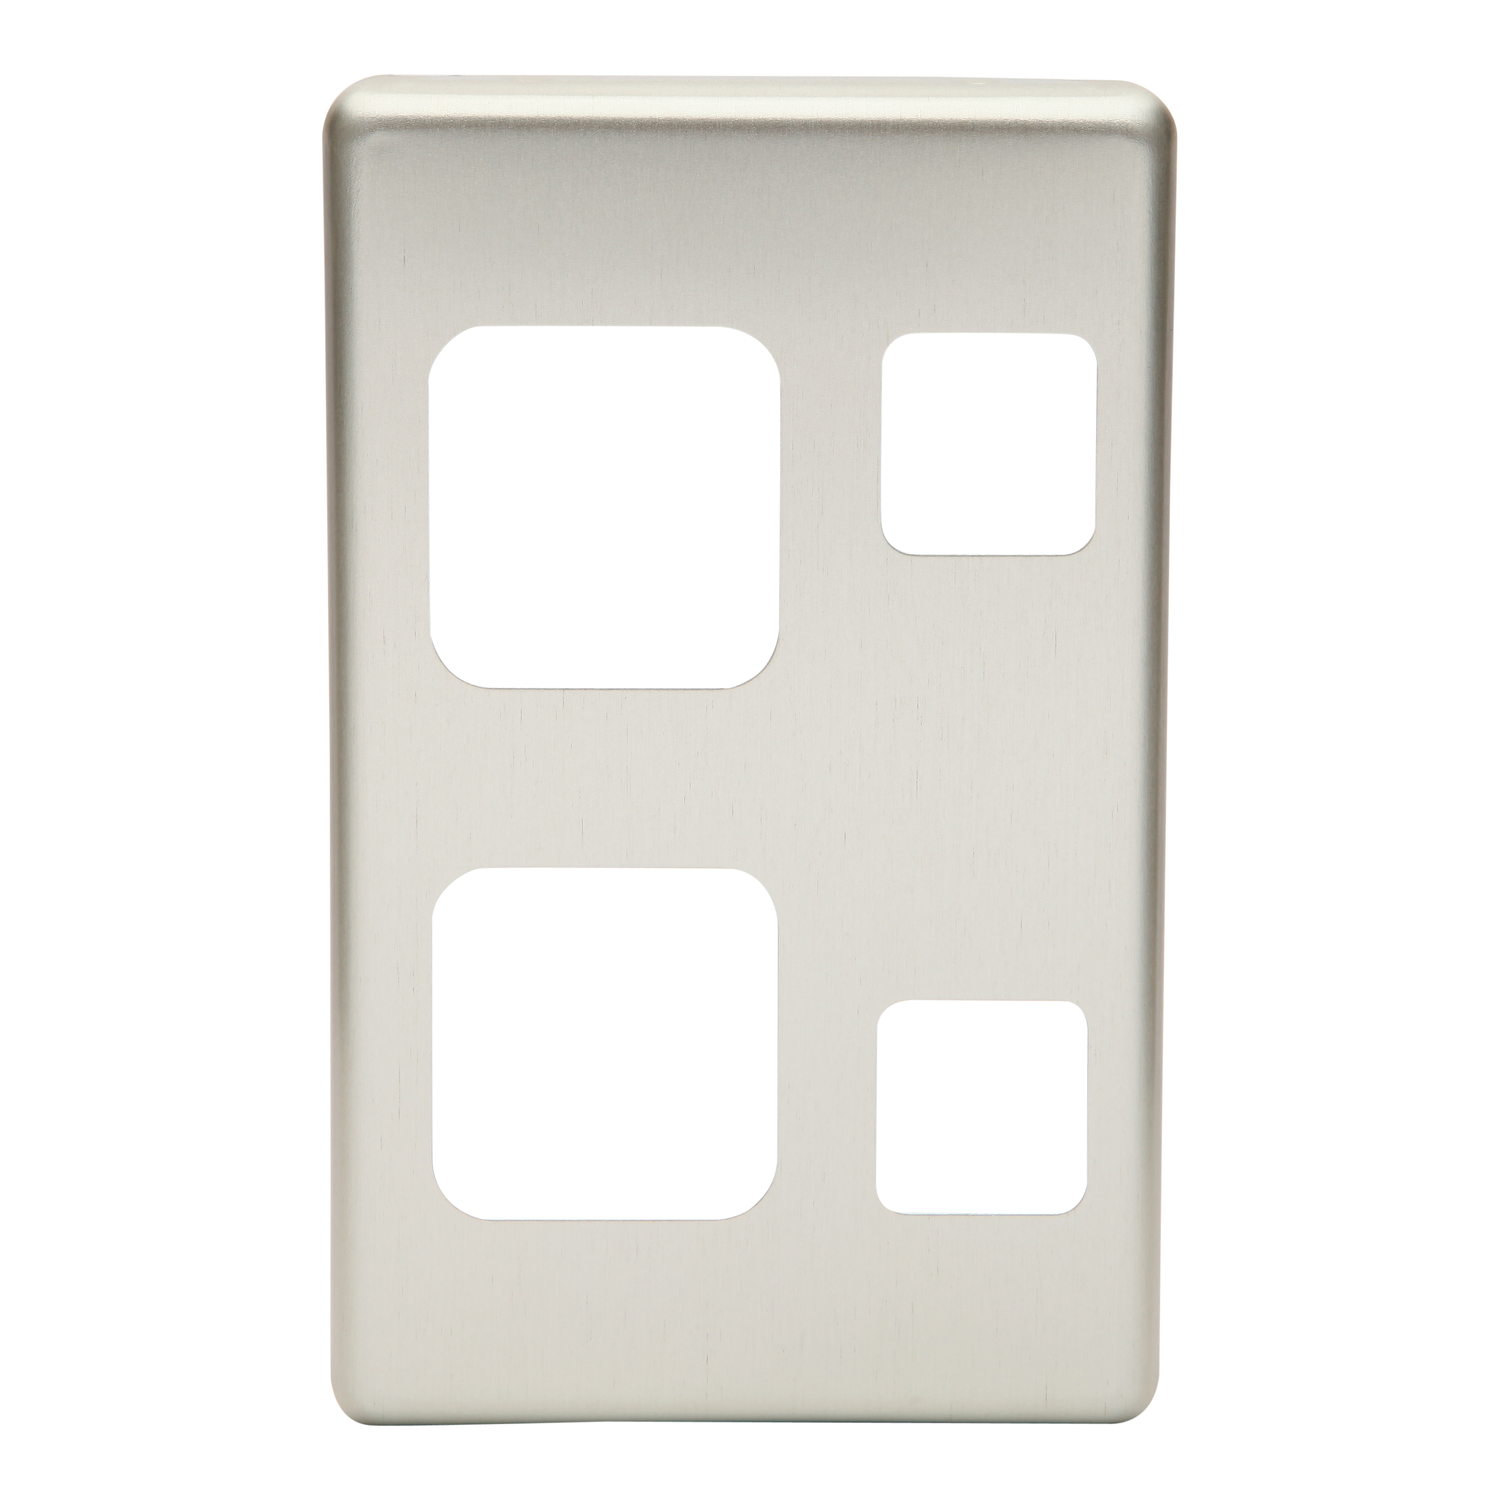 PDL 600 Series - Cover Plate Double Switched Socket Vertical - Stainless Steel